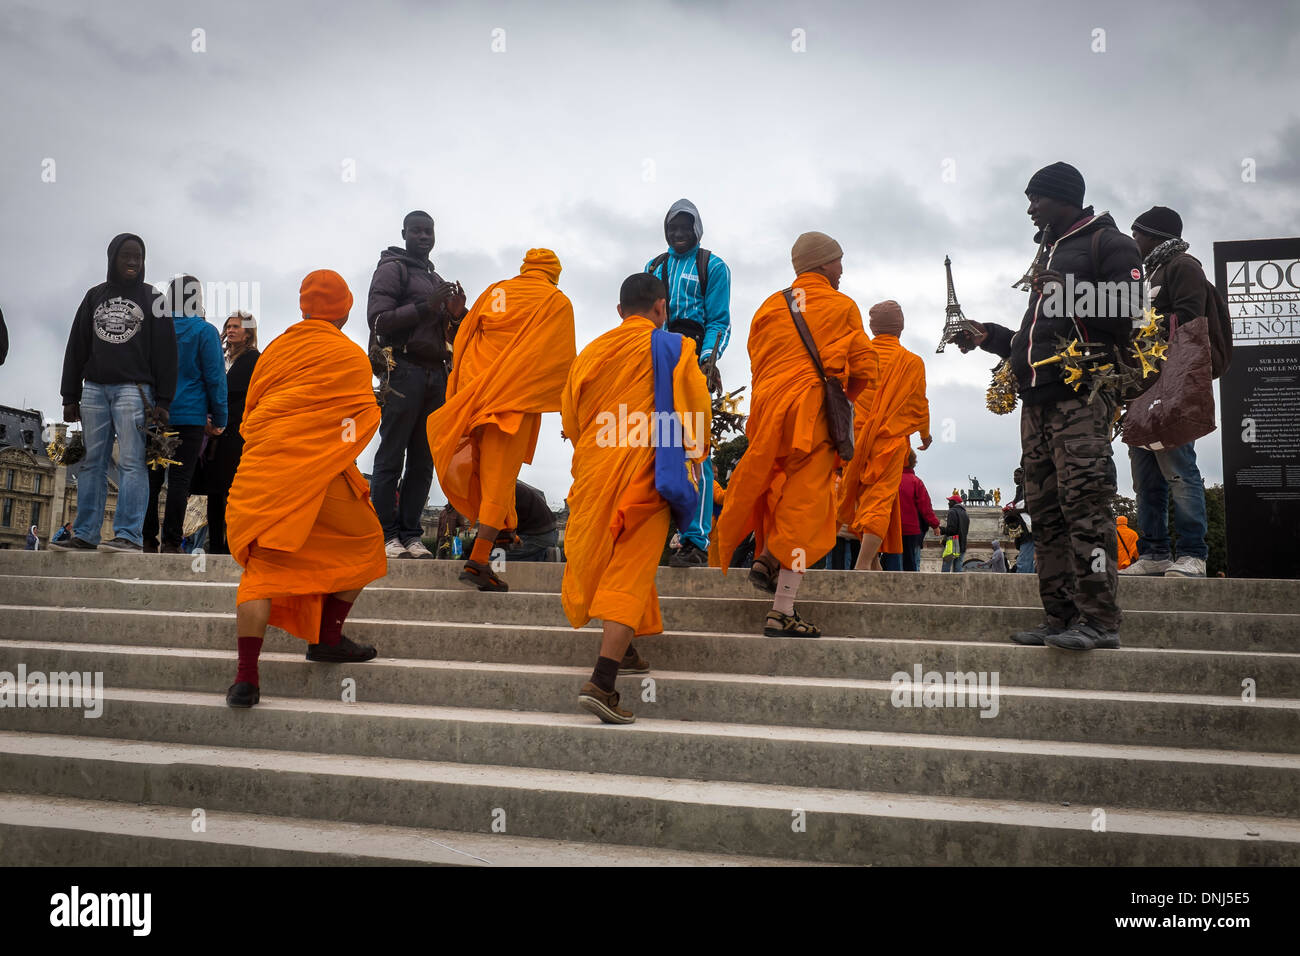 buddhist monks encounter street traders near the Louvre museum Paris France. Stock Photo